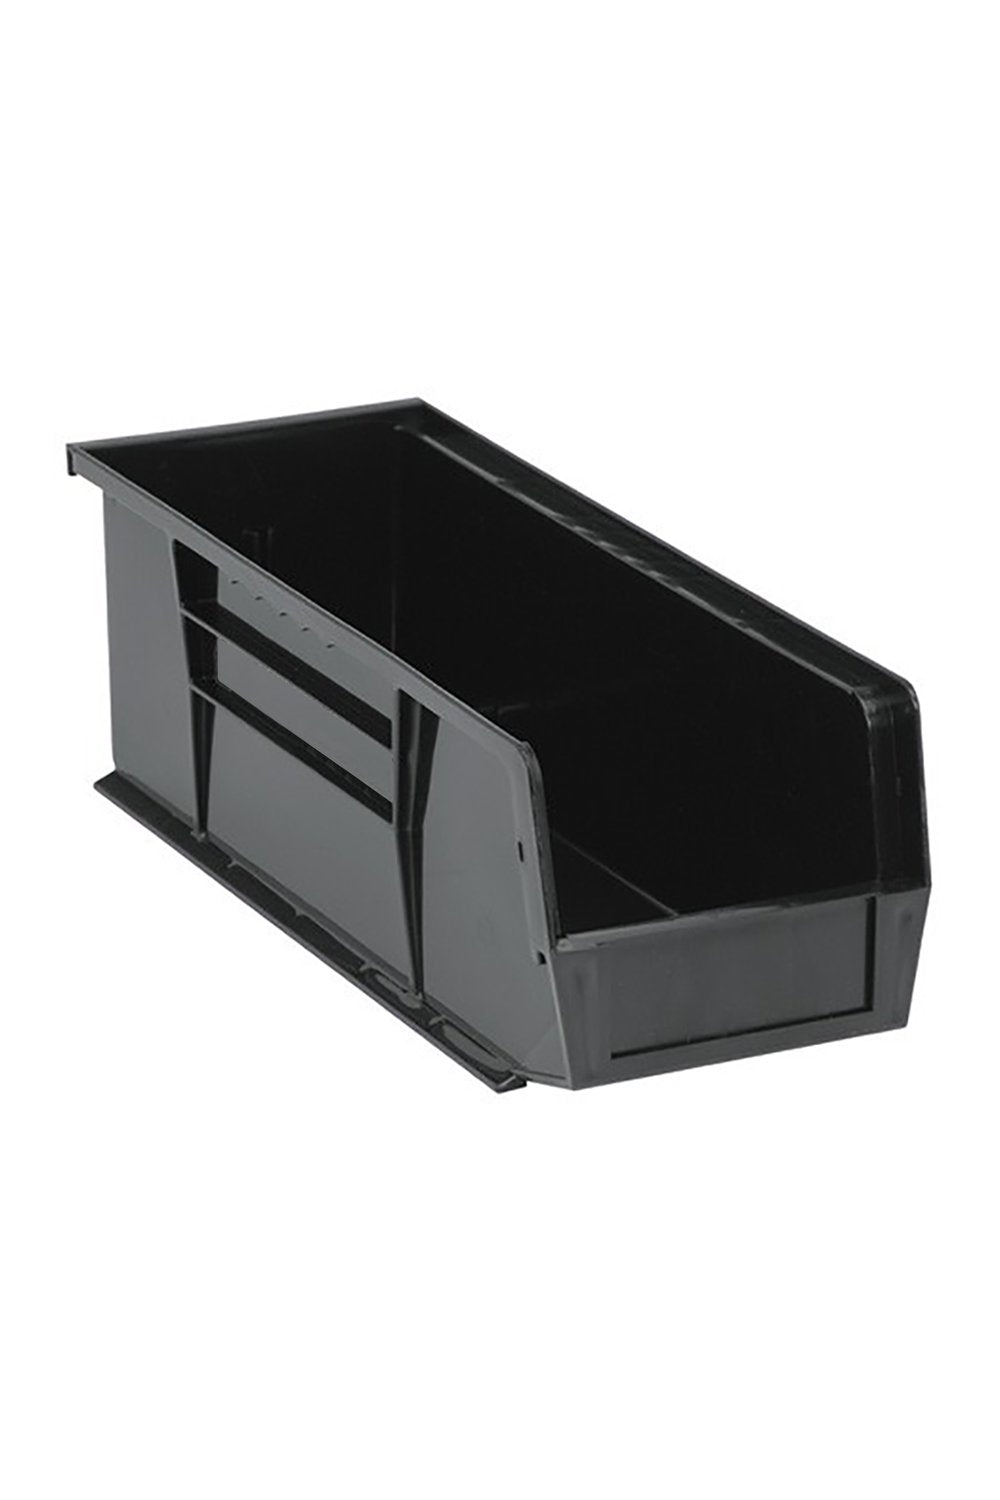 Recycled Ultra Hang and Stack Bin Bins & Containers Acart 14-3/4"L x 5-1/2"W x 5"H Black 